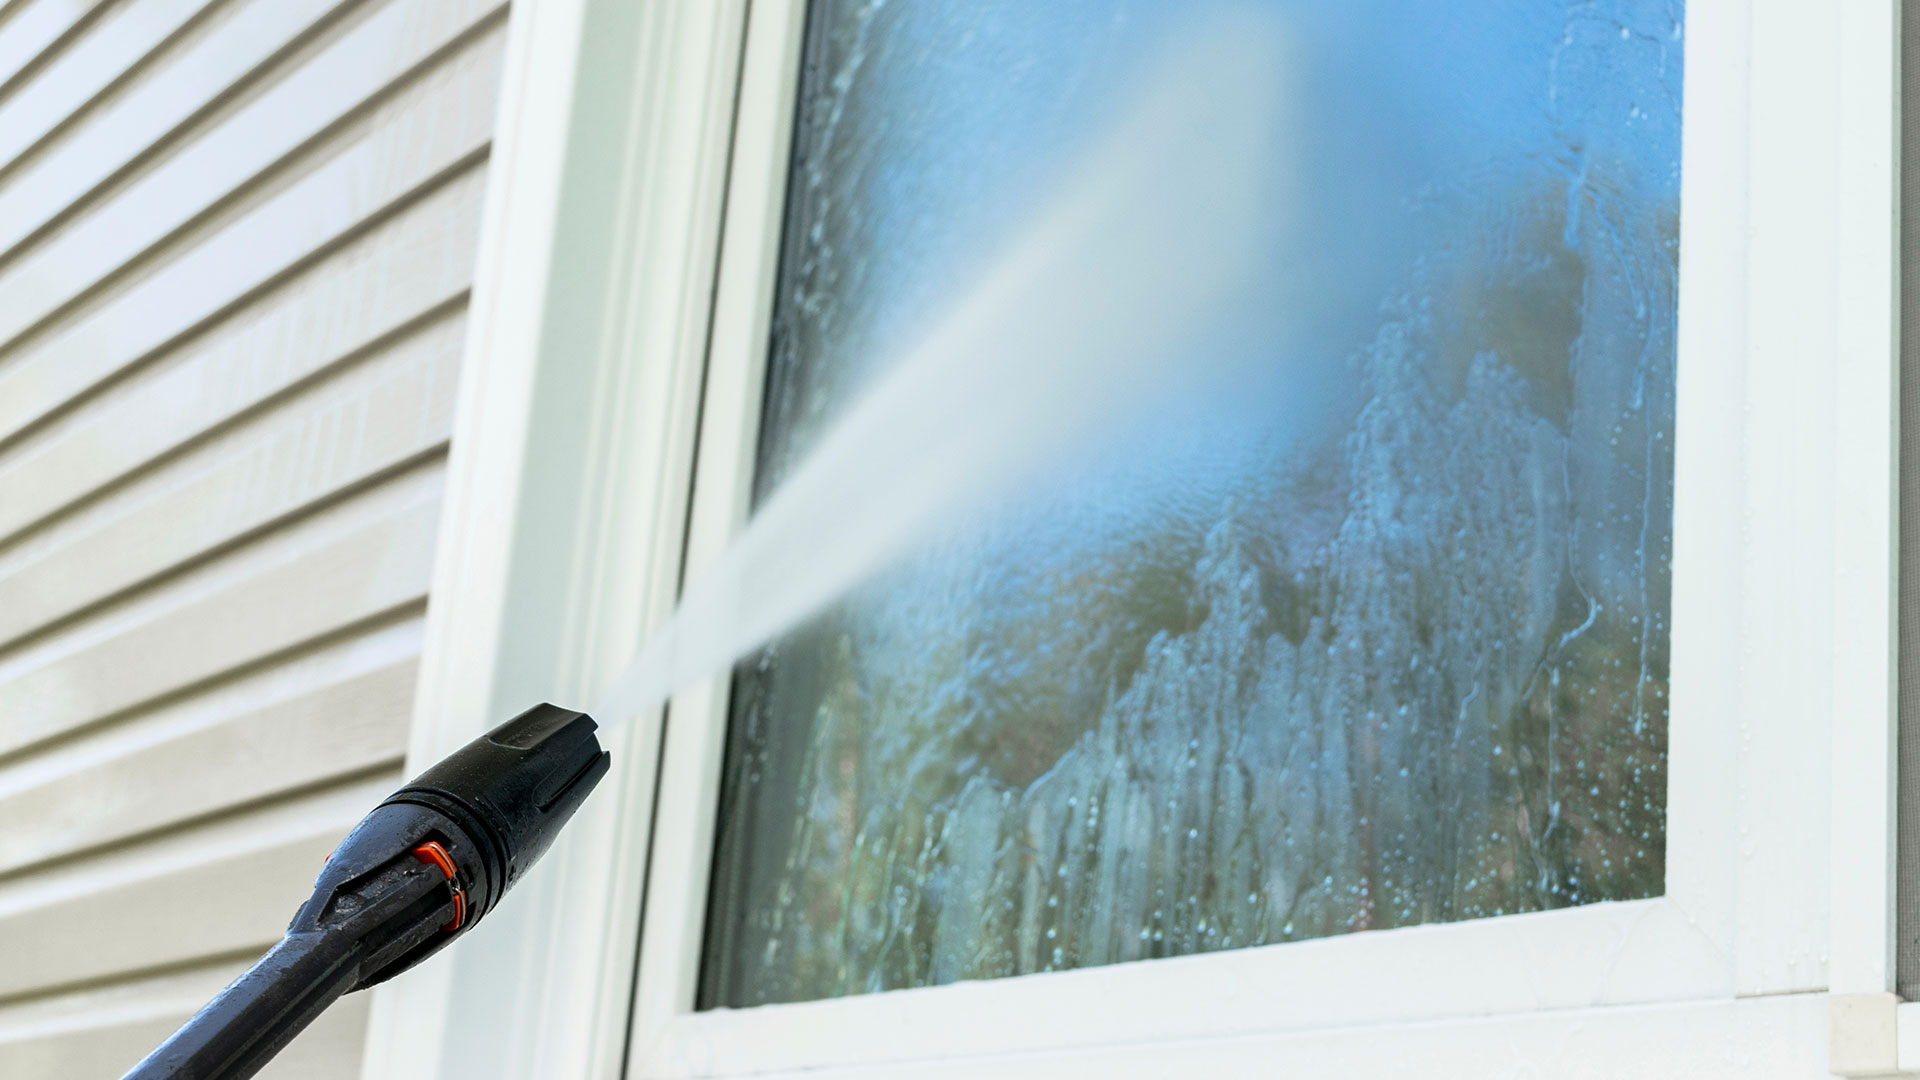 Window cleaning services at a home property in Calgary, Alberta.